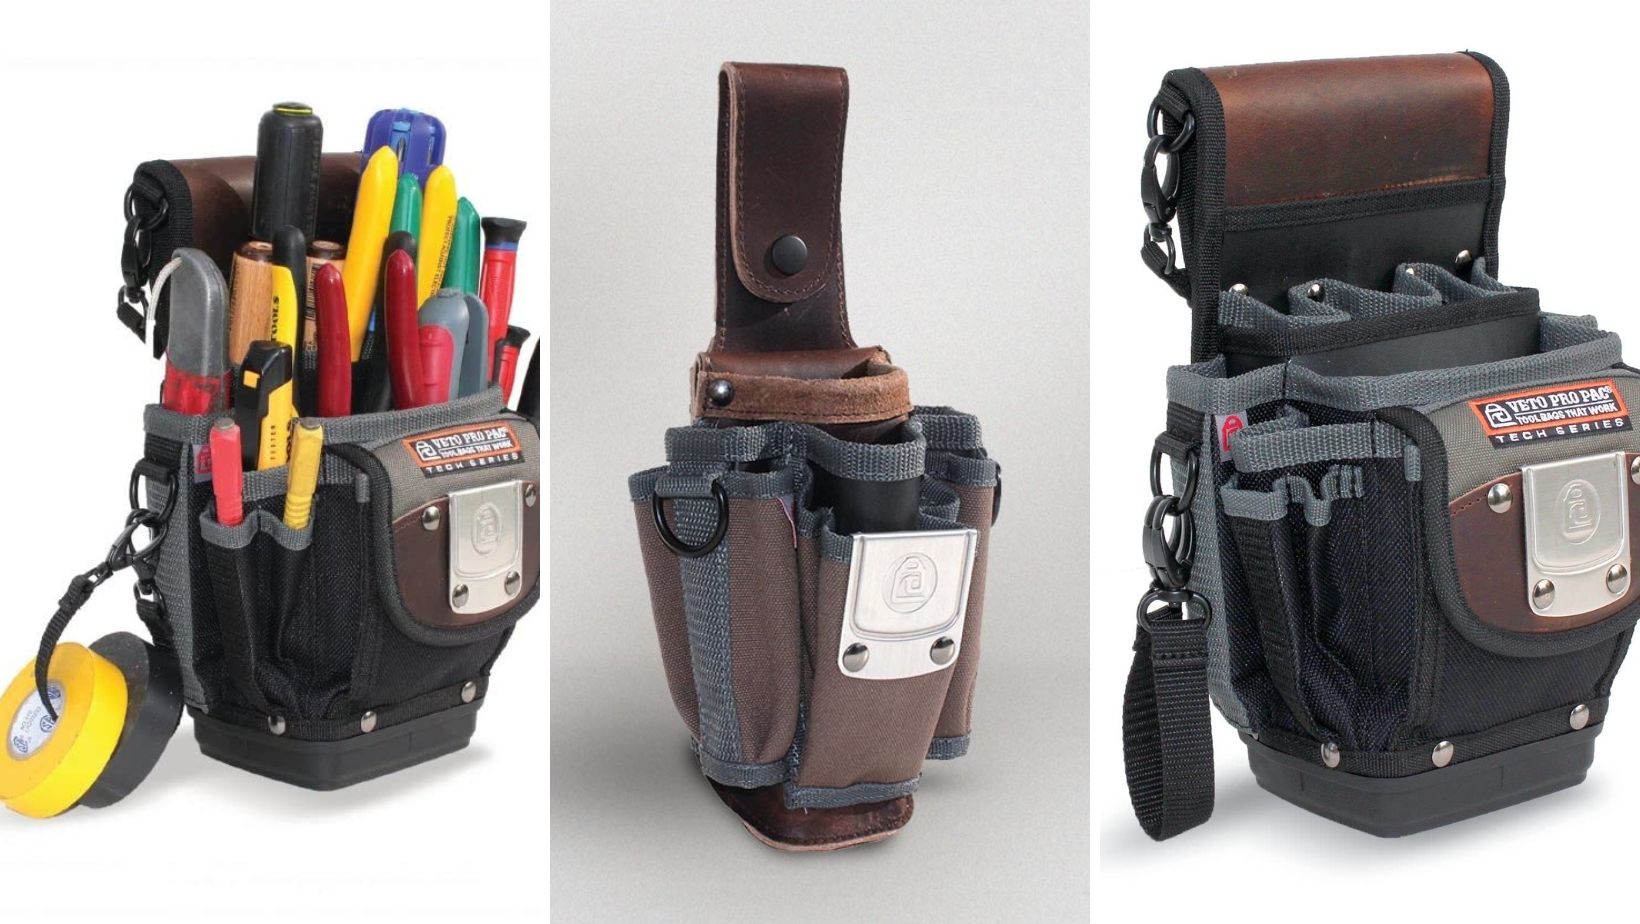 Three veto pro pacs used to carry tools